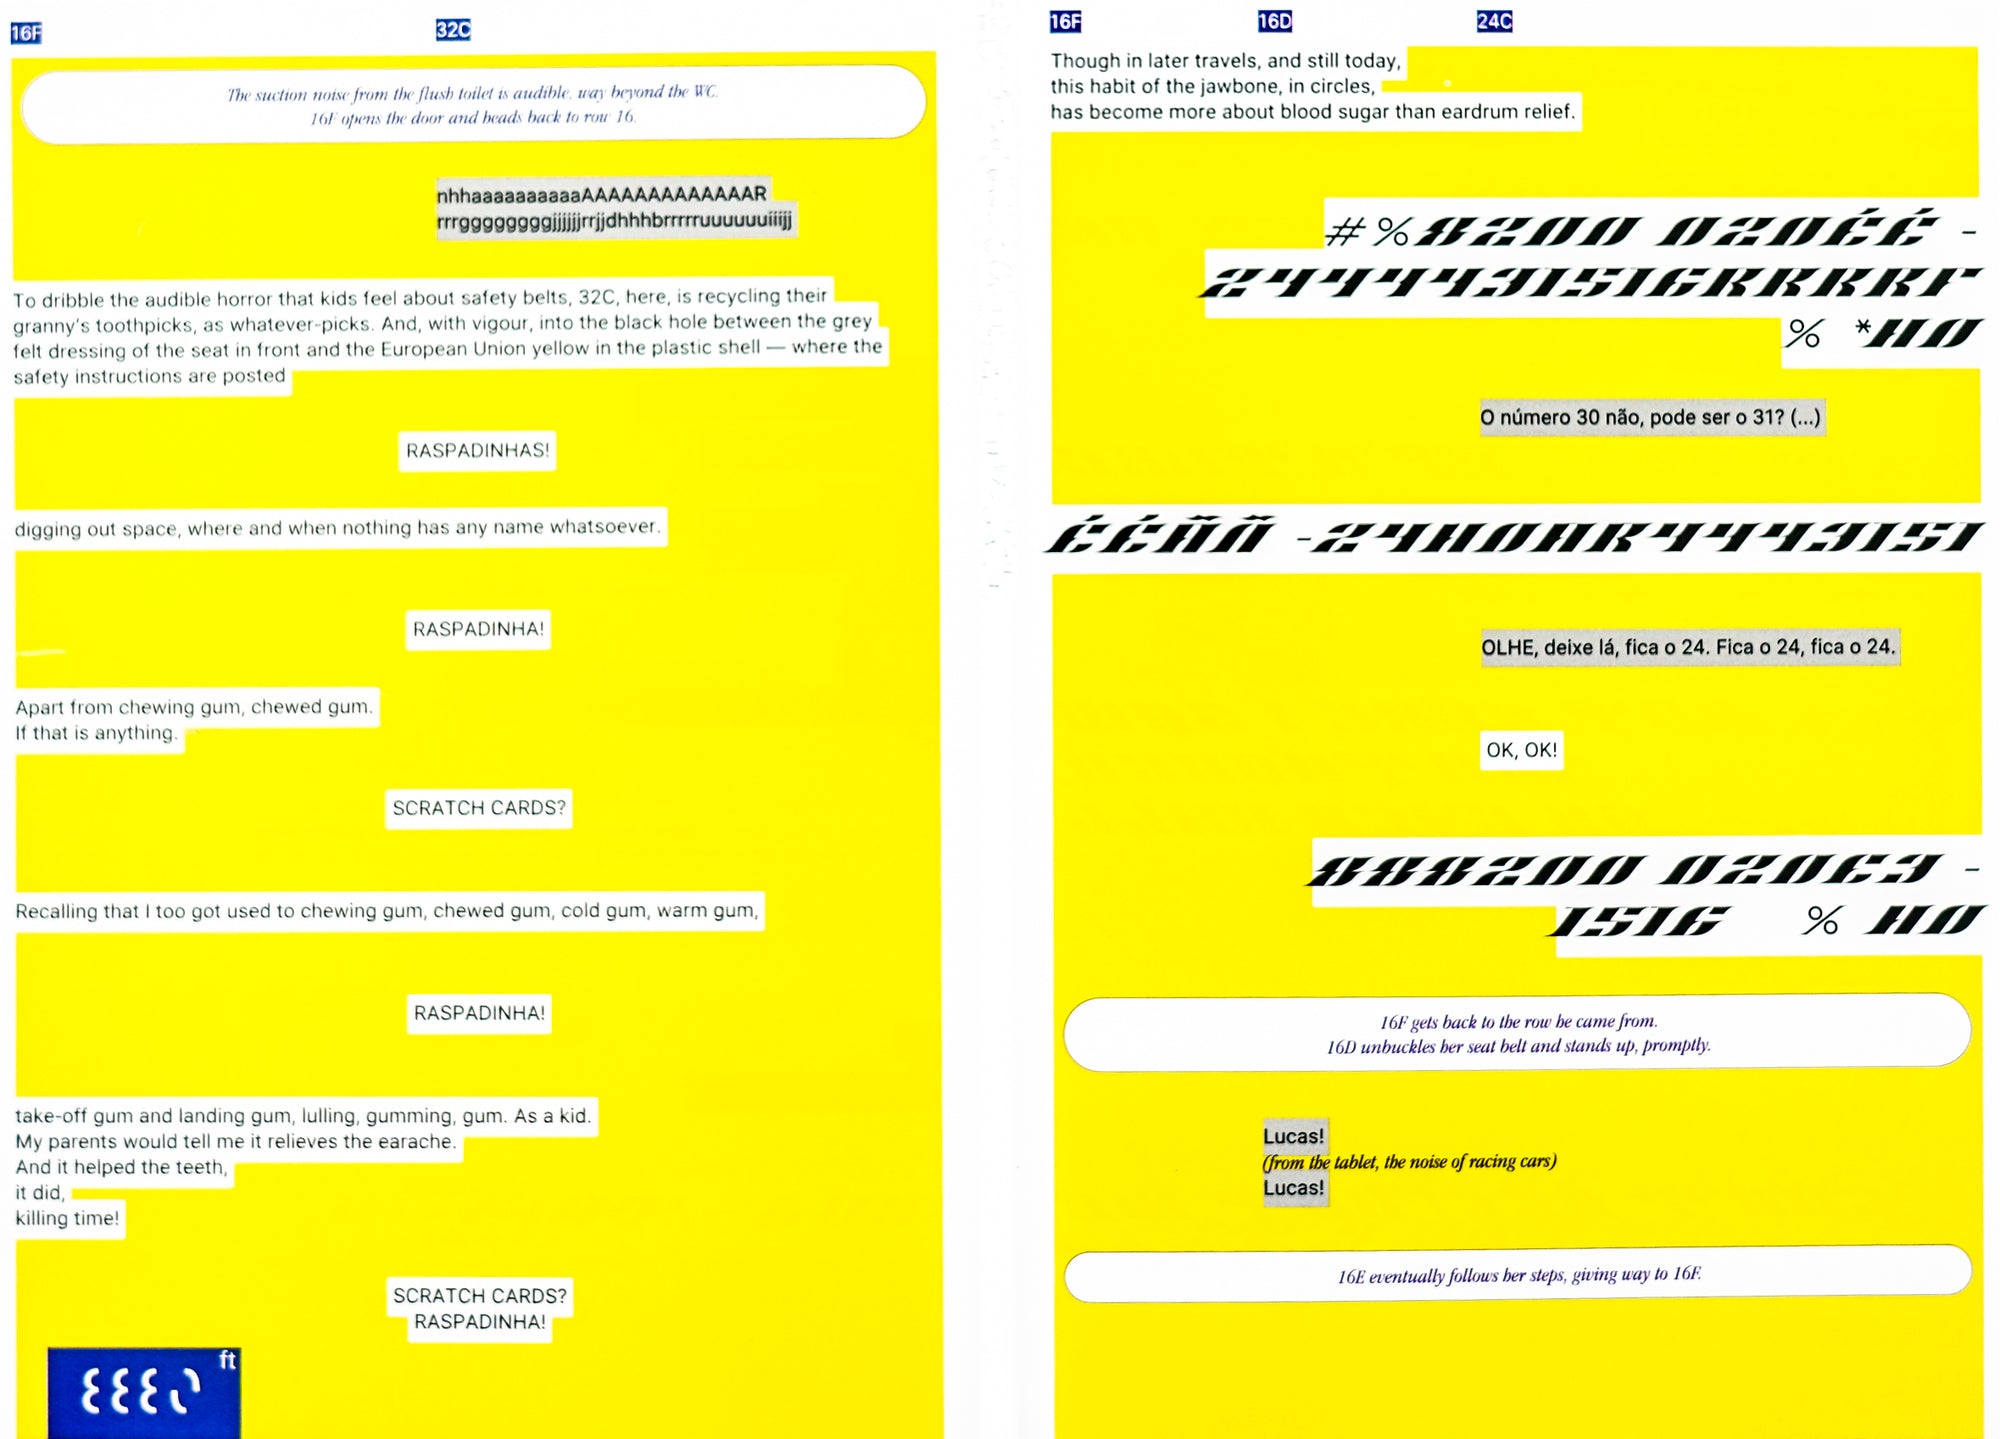 A spread of two pages showing a largely yellow background with a dialogue set in various different typefaces and graphics. Spanning on the top border, seat numbers resembling those of a plane are dotted. 